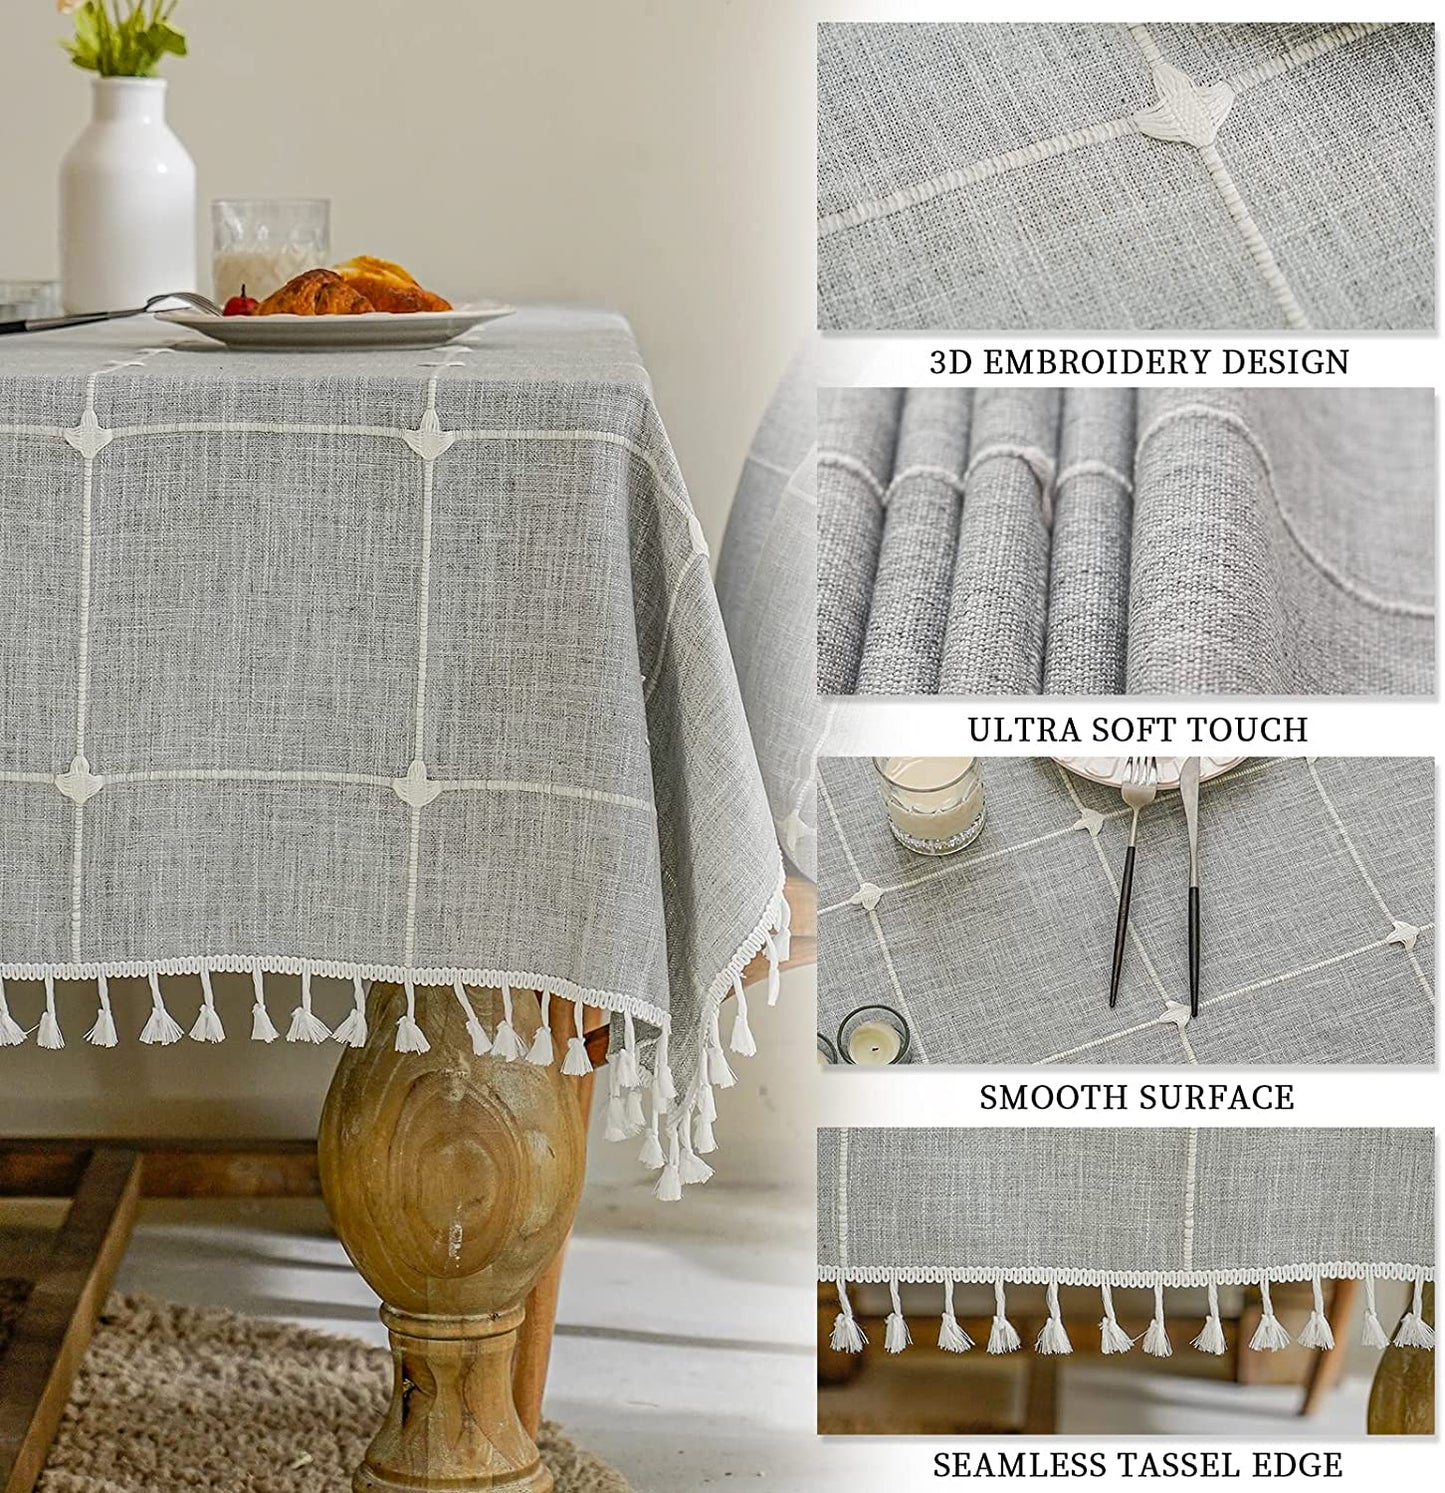 Mokani Solid Embroidery Checkered Table Cloth Washable Cotton Linen Tassel Tablecloth, Rectangle Wrinkle Free Anti-Fading Table Cover for Kitchen Dinning Thanksgiving Christmas (55 x 102 Inch, Gray) - (For 6 piece(s))